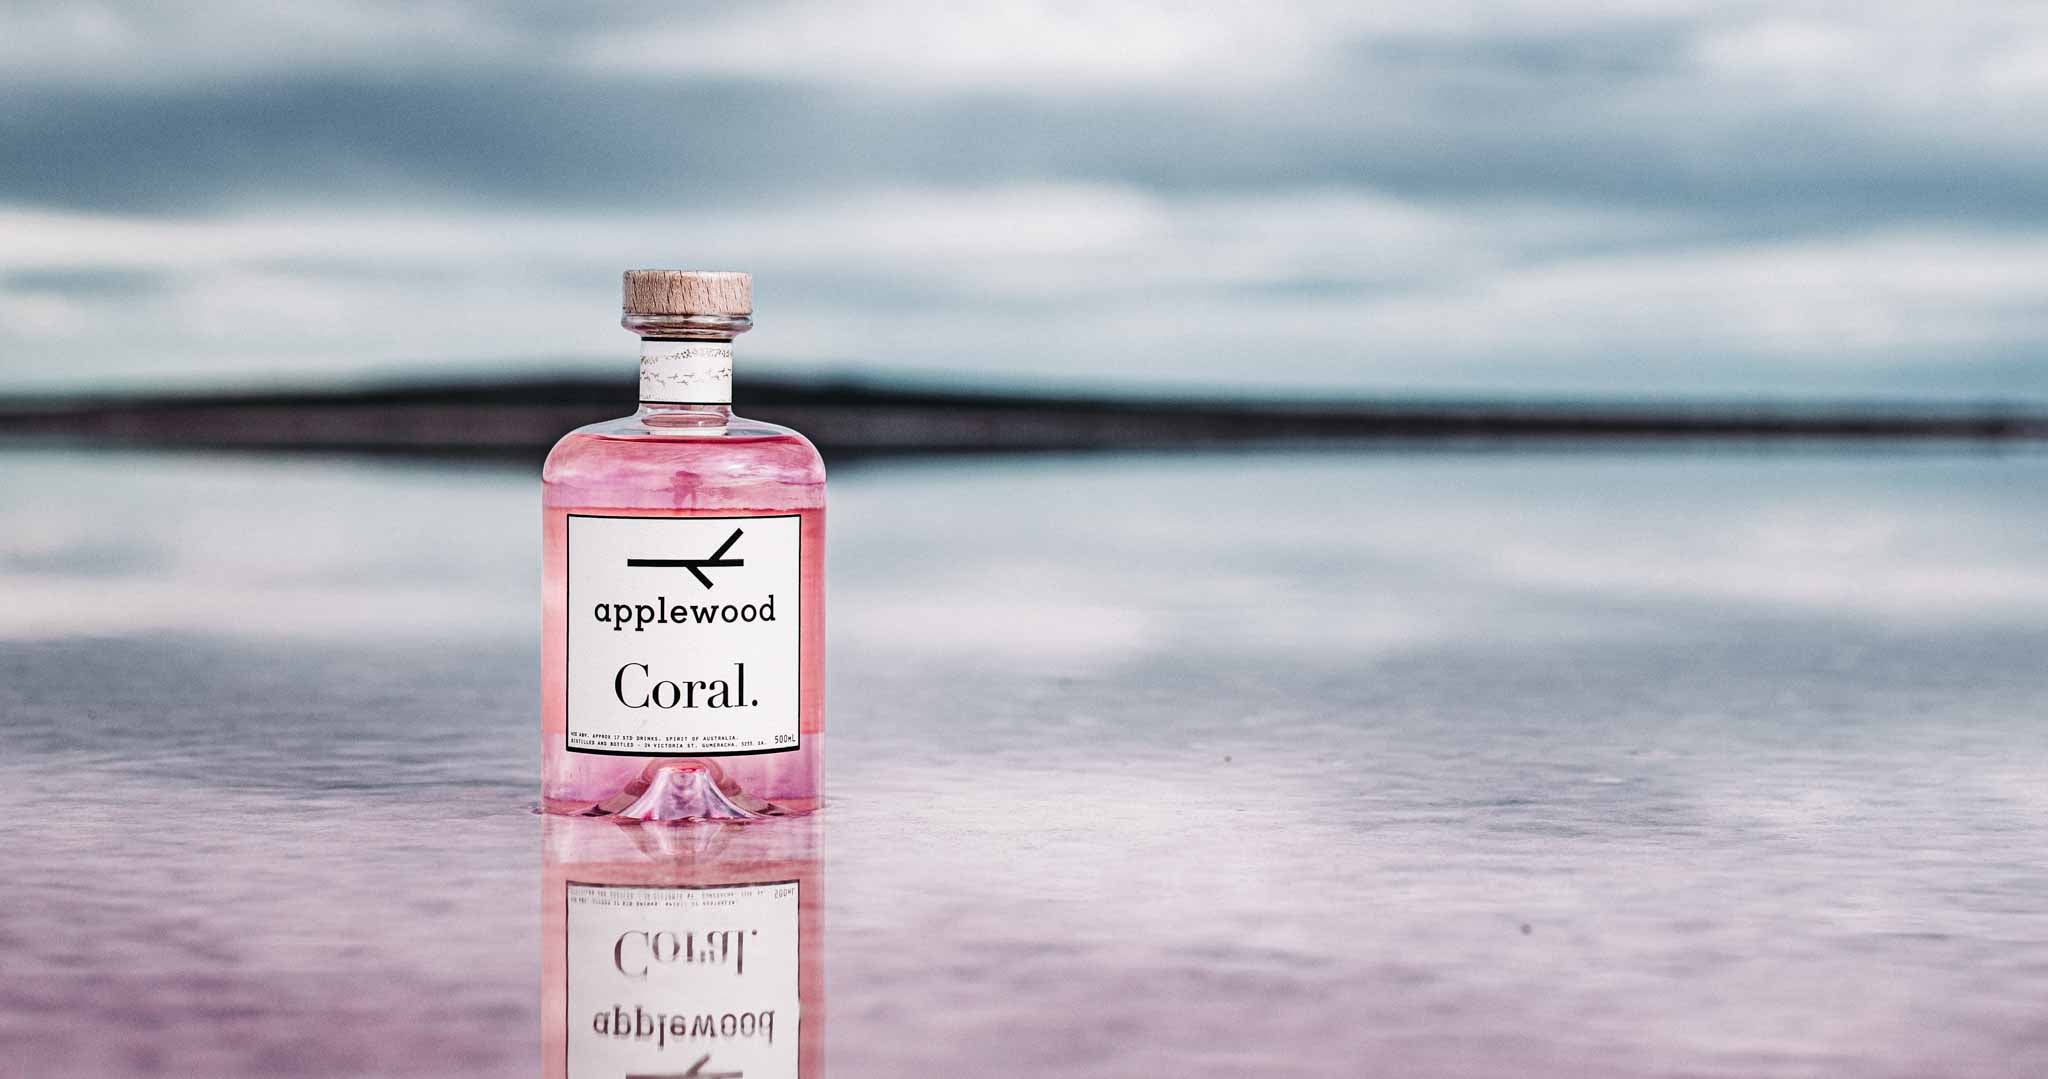 Applewood Coral pink gin on a beach. There is a blue sky and pink bottle with a beautiful reflection